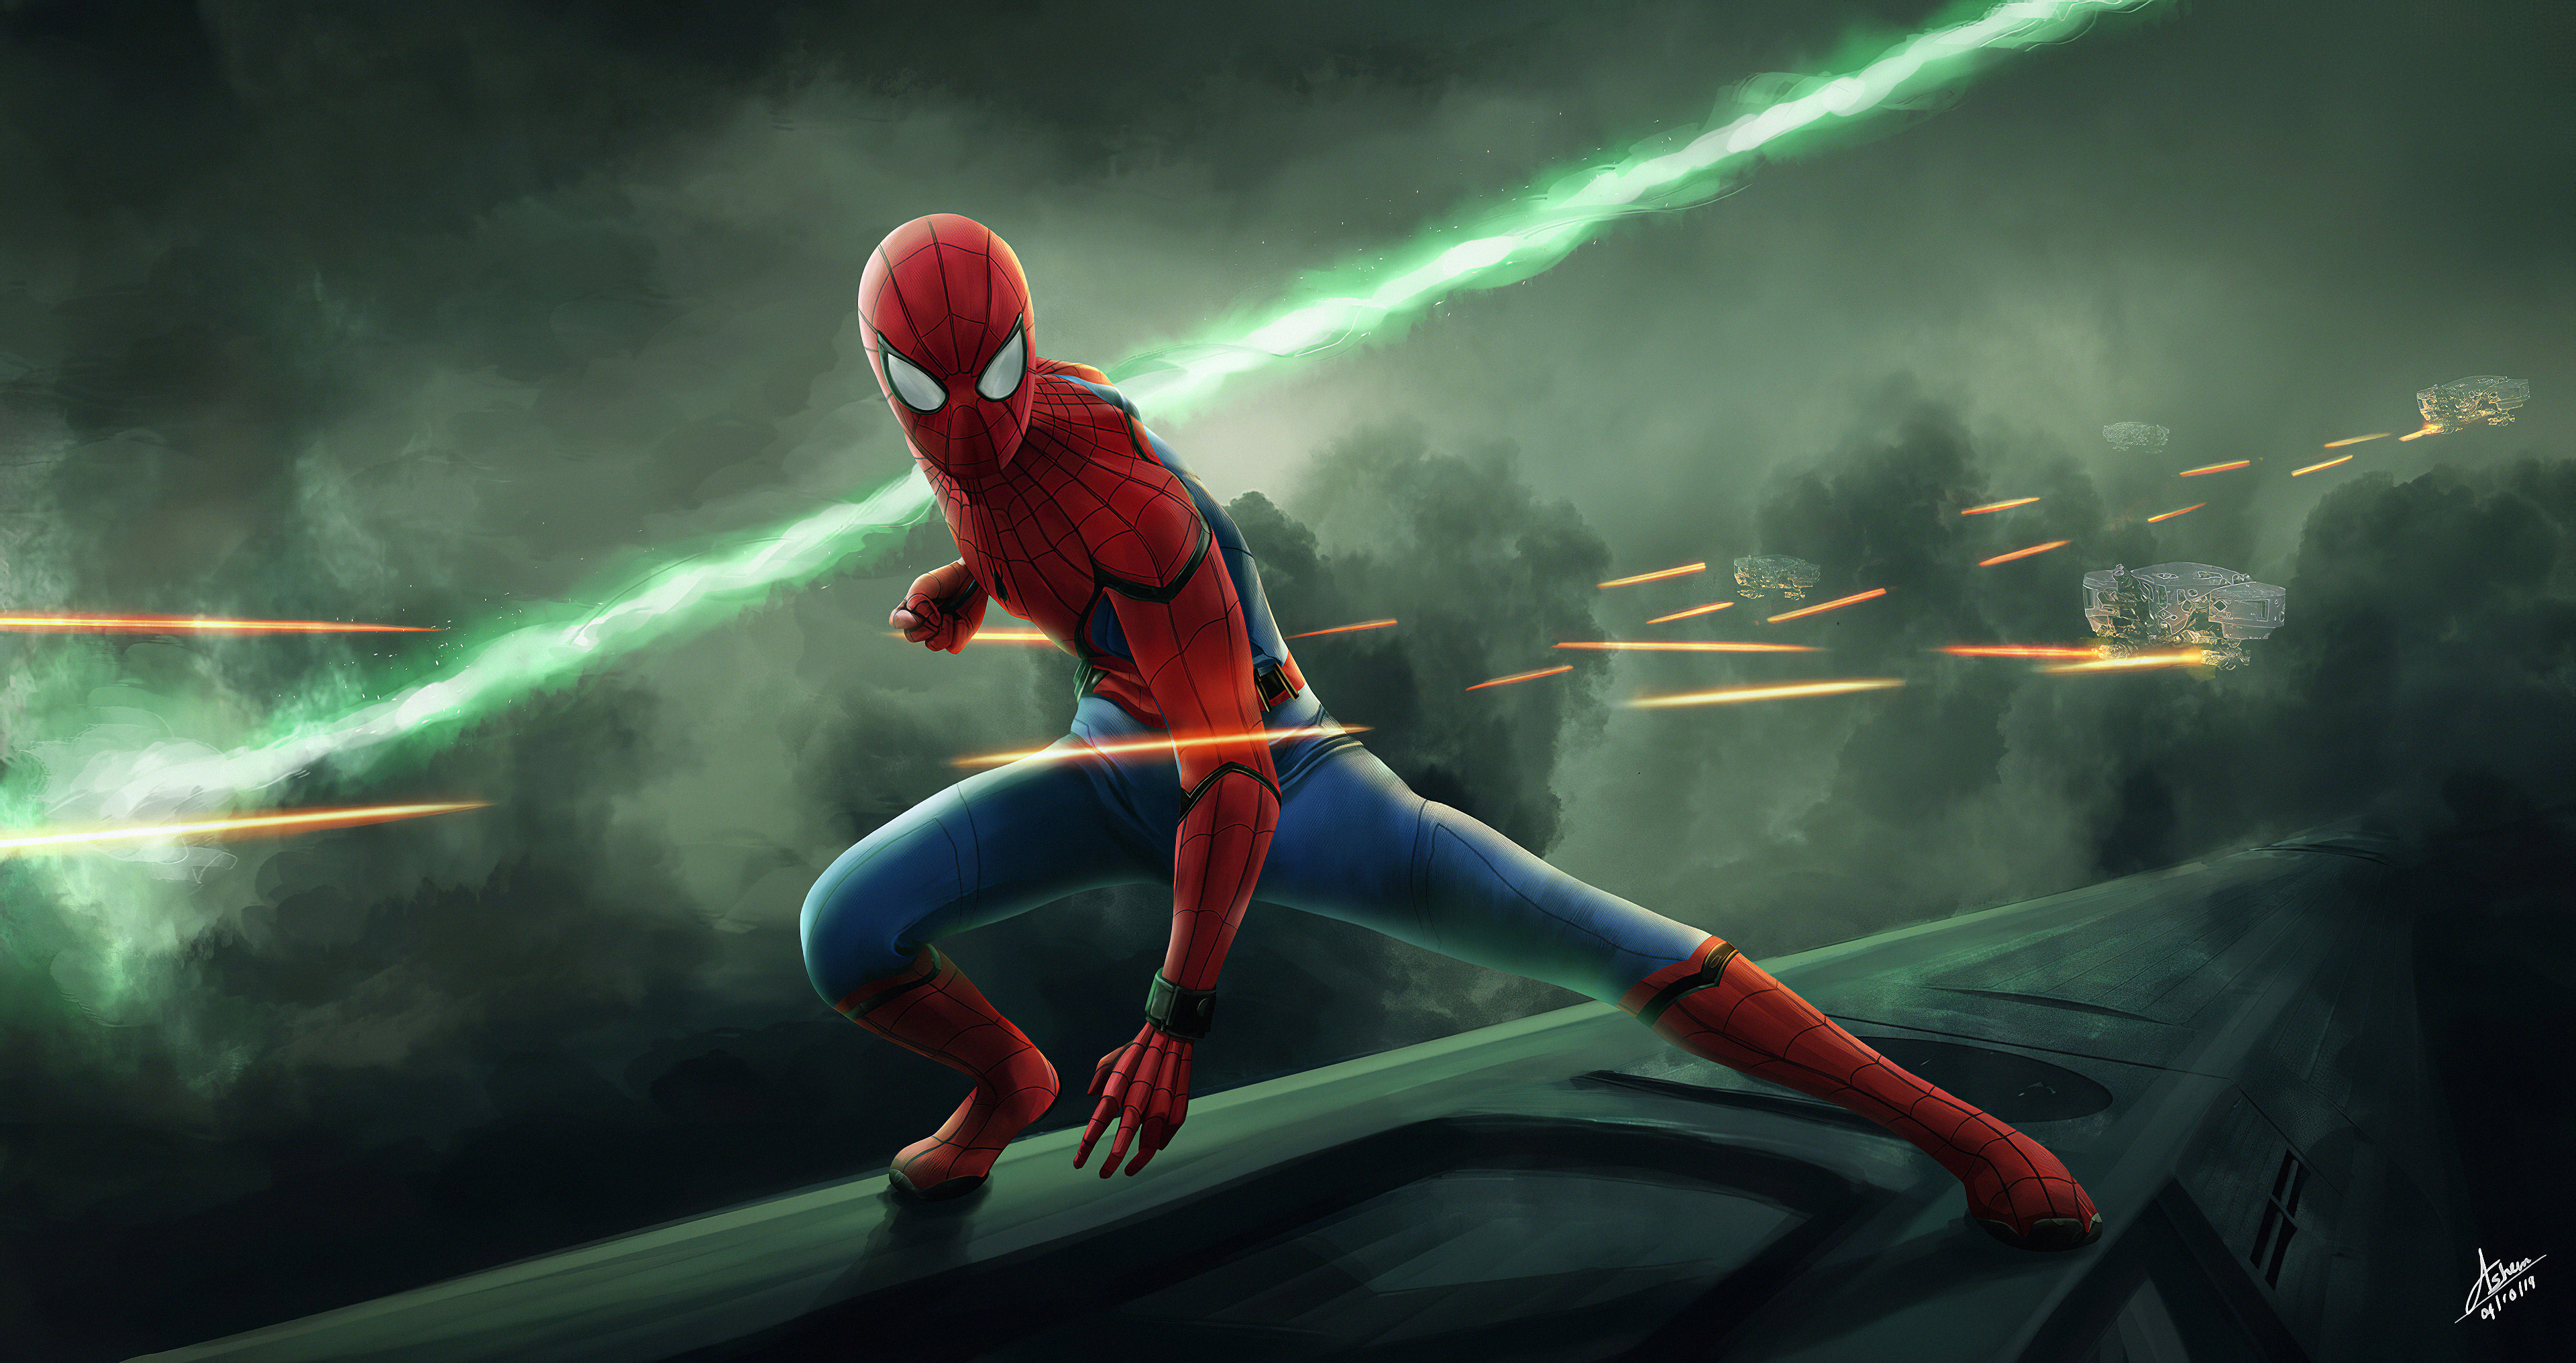 Marvel Spiderman (10587) Wall Paper Mural | Buy at EuroPosters